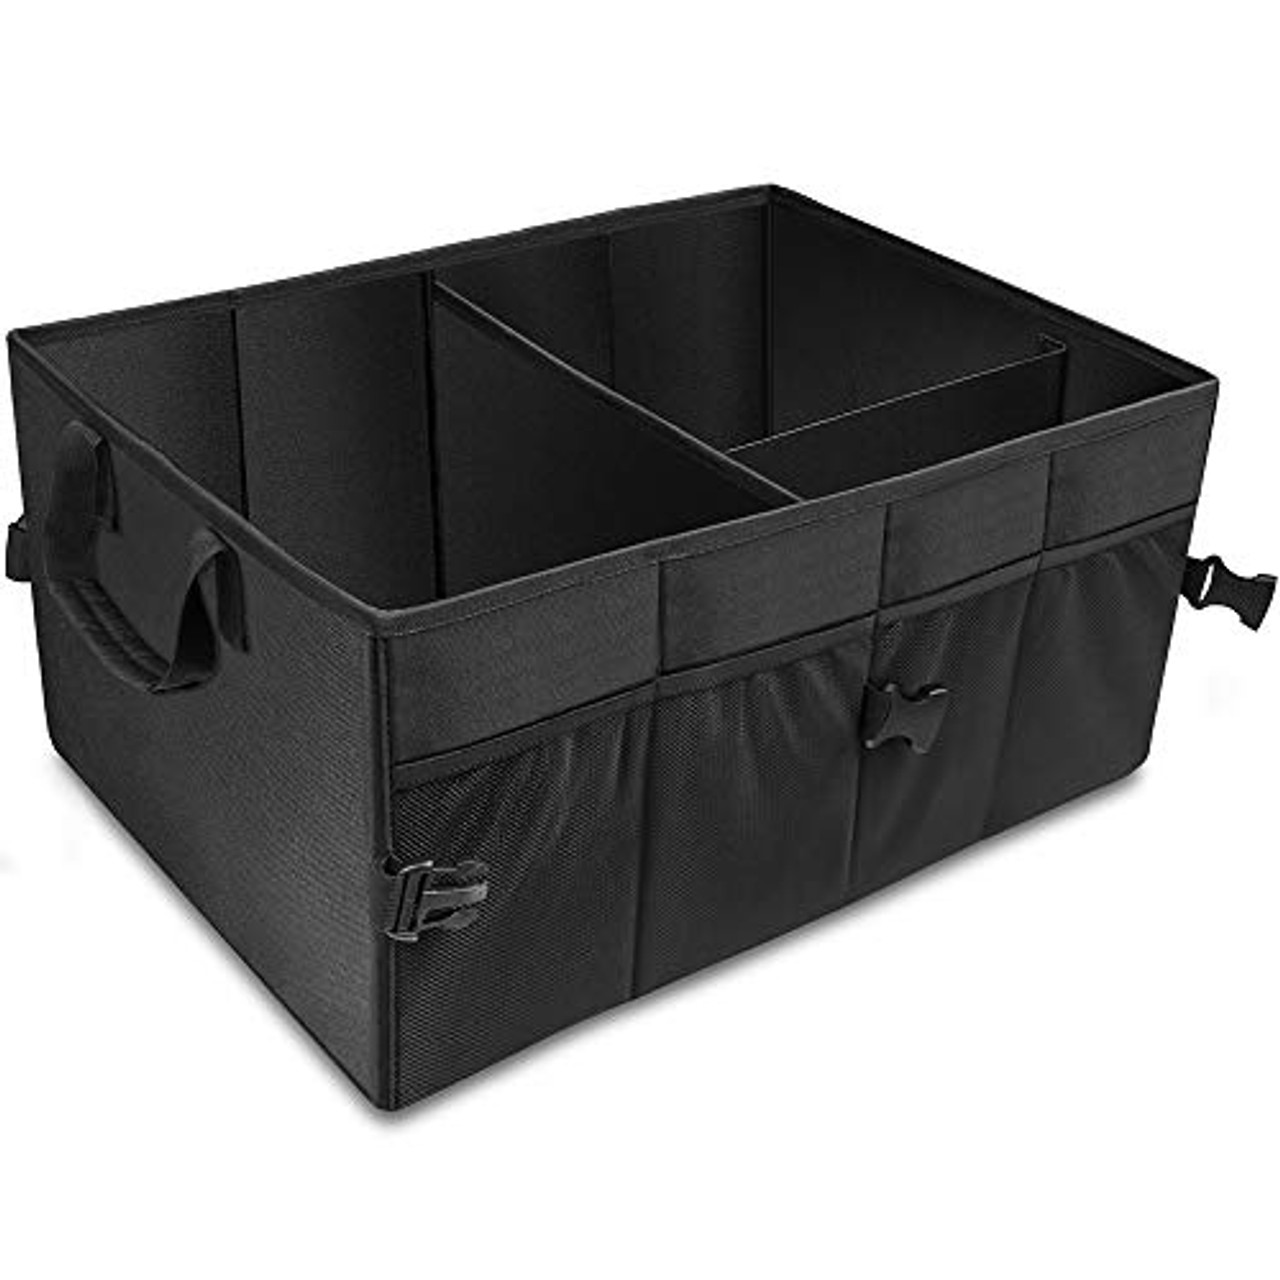 Truck AsFrost  Car Trunk Organizer Basket Home and Office Collapsible Foldable Auto Trunk Organizer Storage Bin Cubes Black Vehicle Portable Grocery Cargo Container for SUV